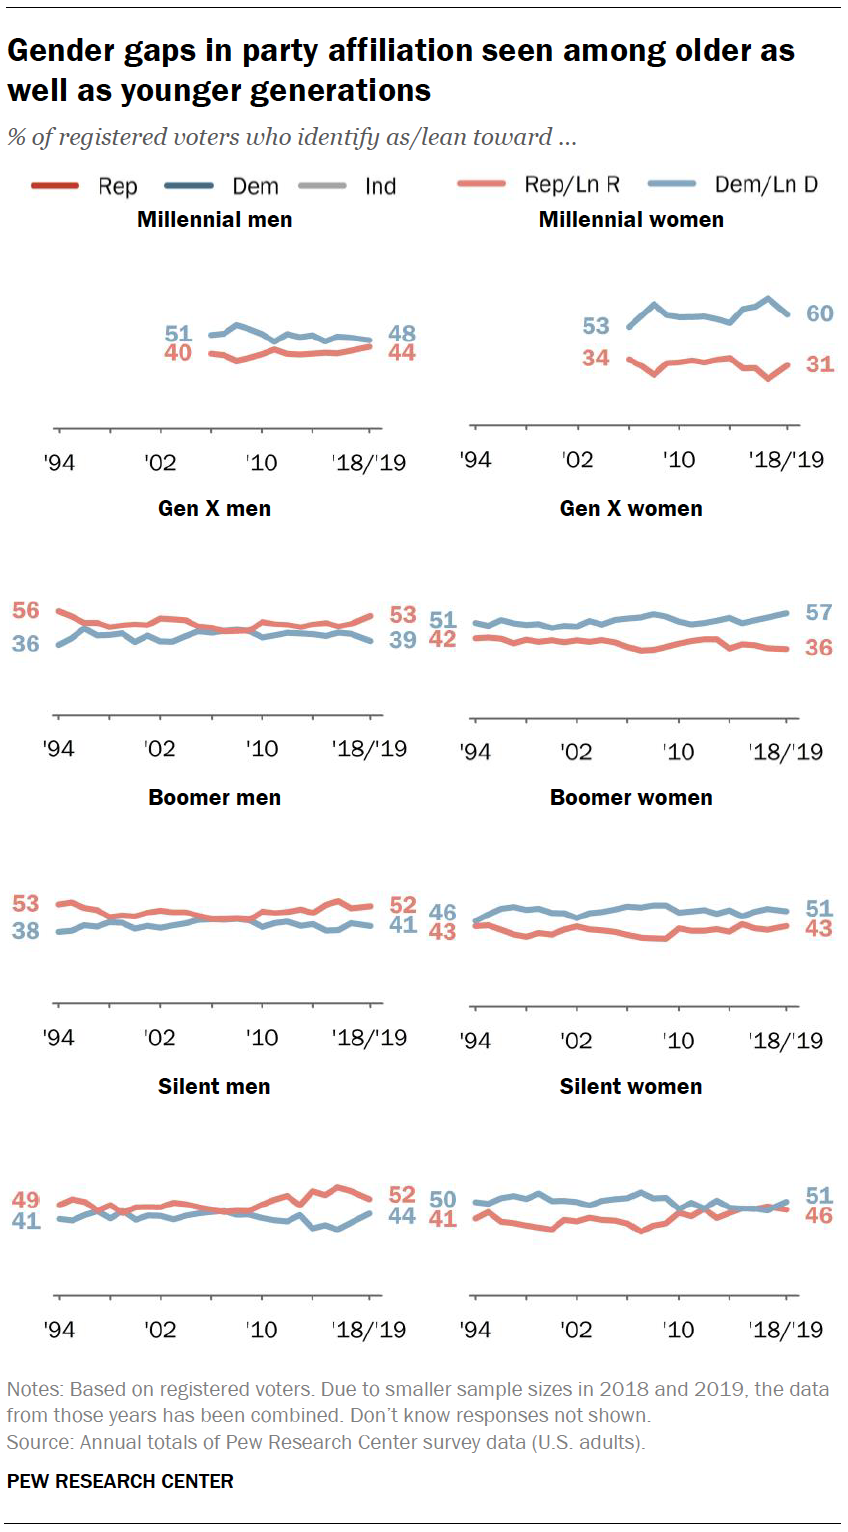 Gender gaps in party affiliation seen among older as well as younger generations